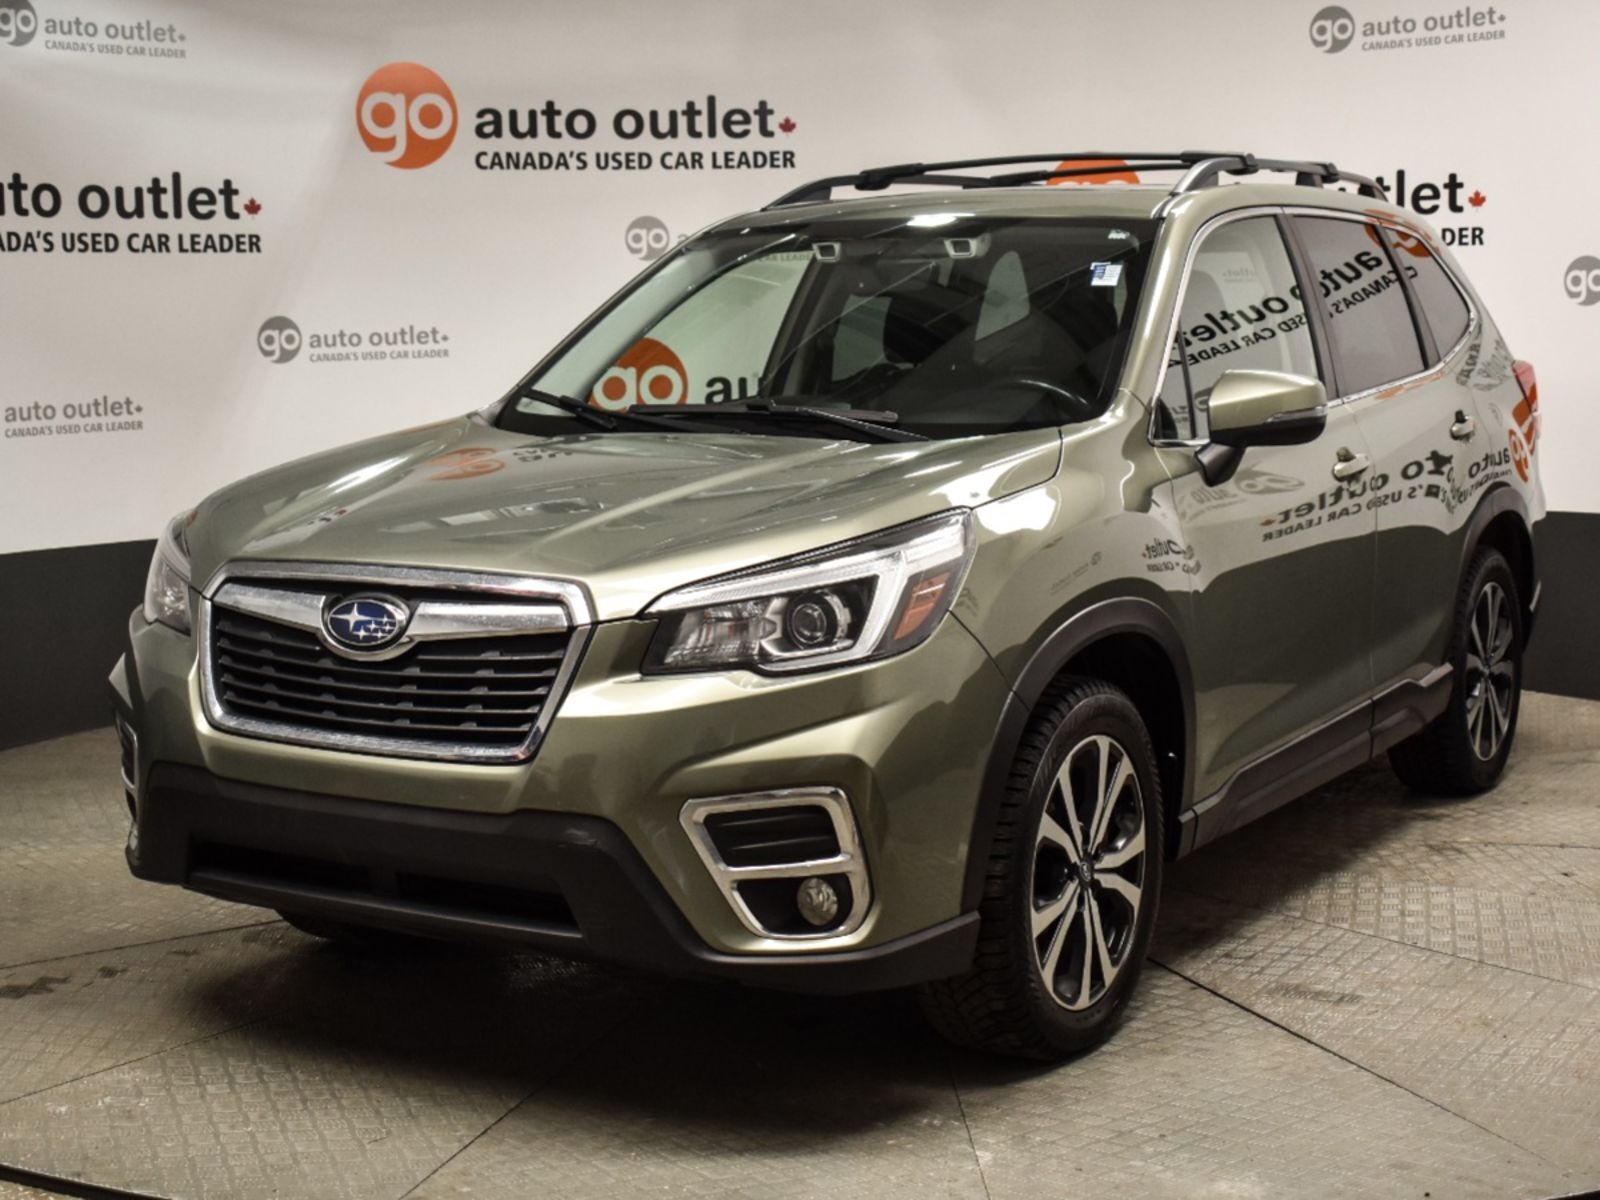 2020 Subaru Forester Limited AWD Advanced Safety, Pano Sunroof